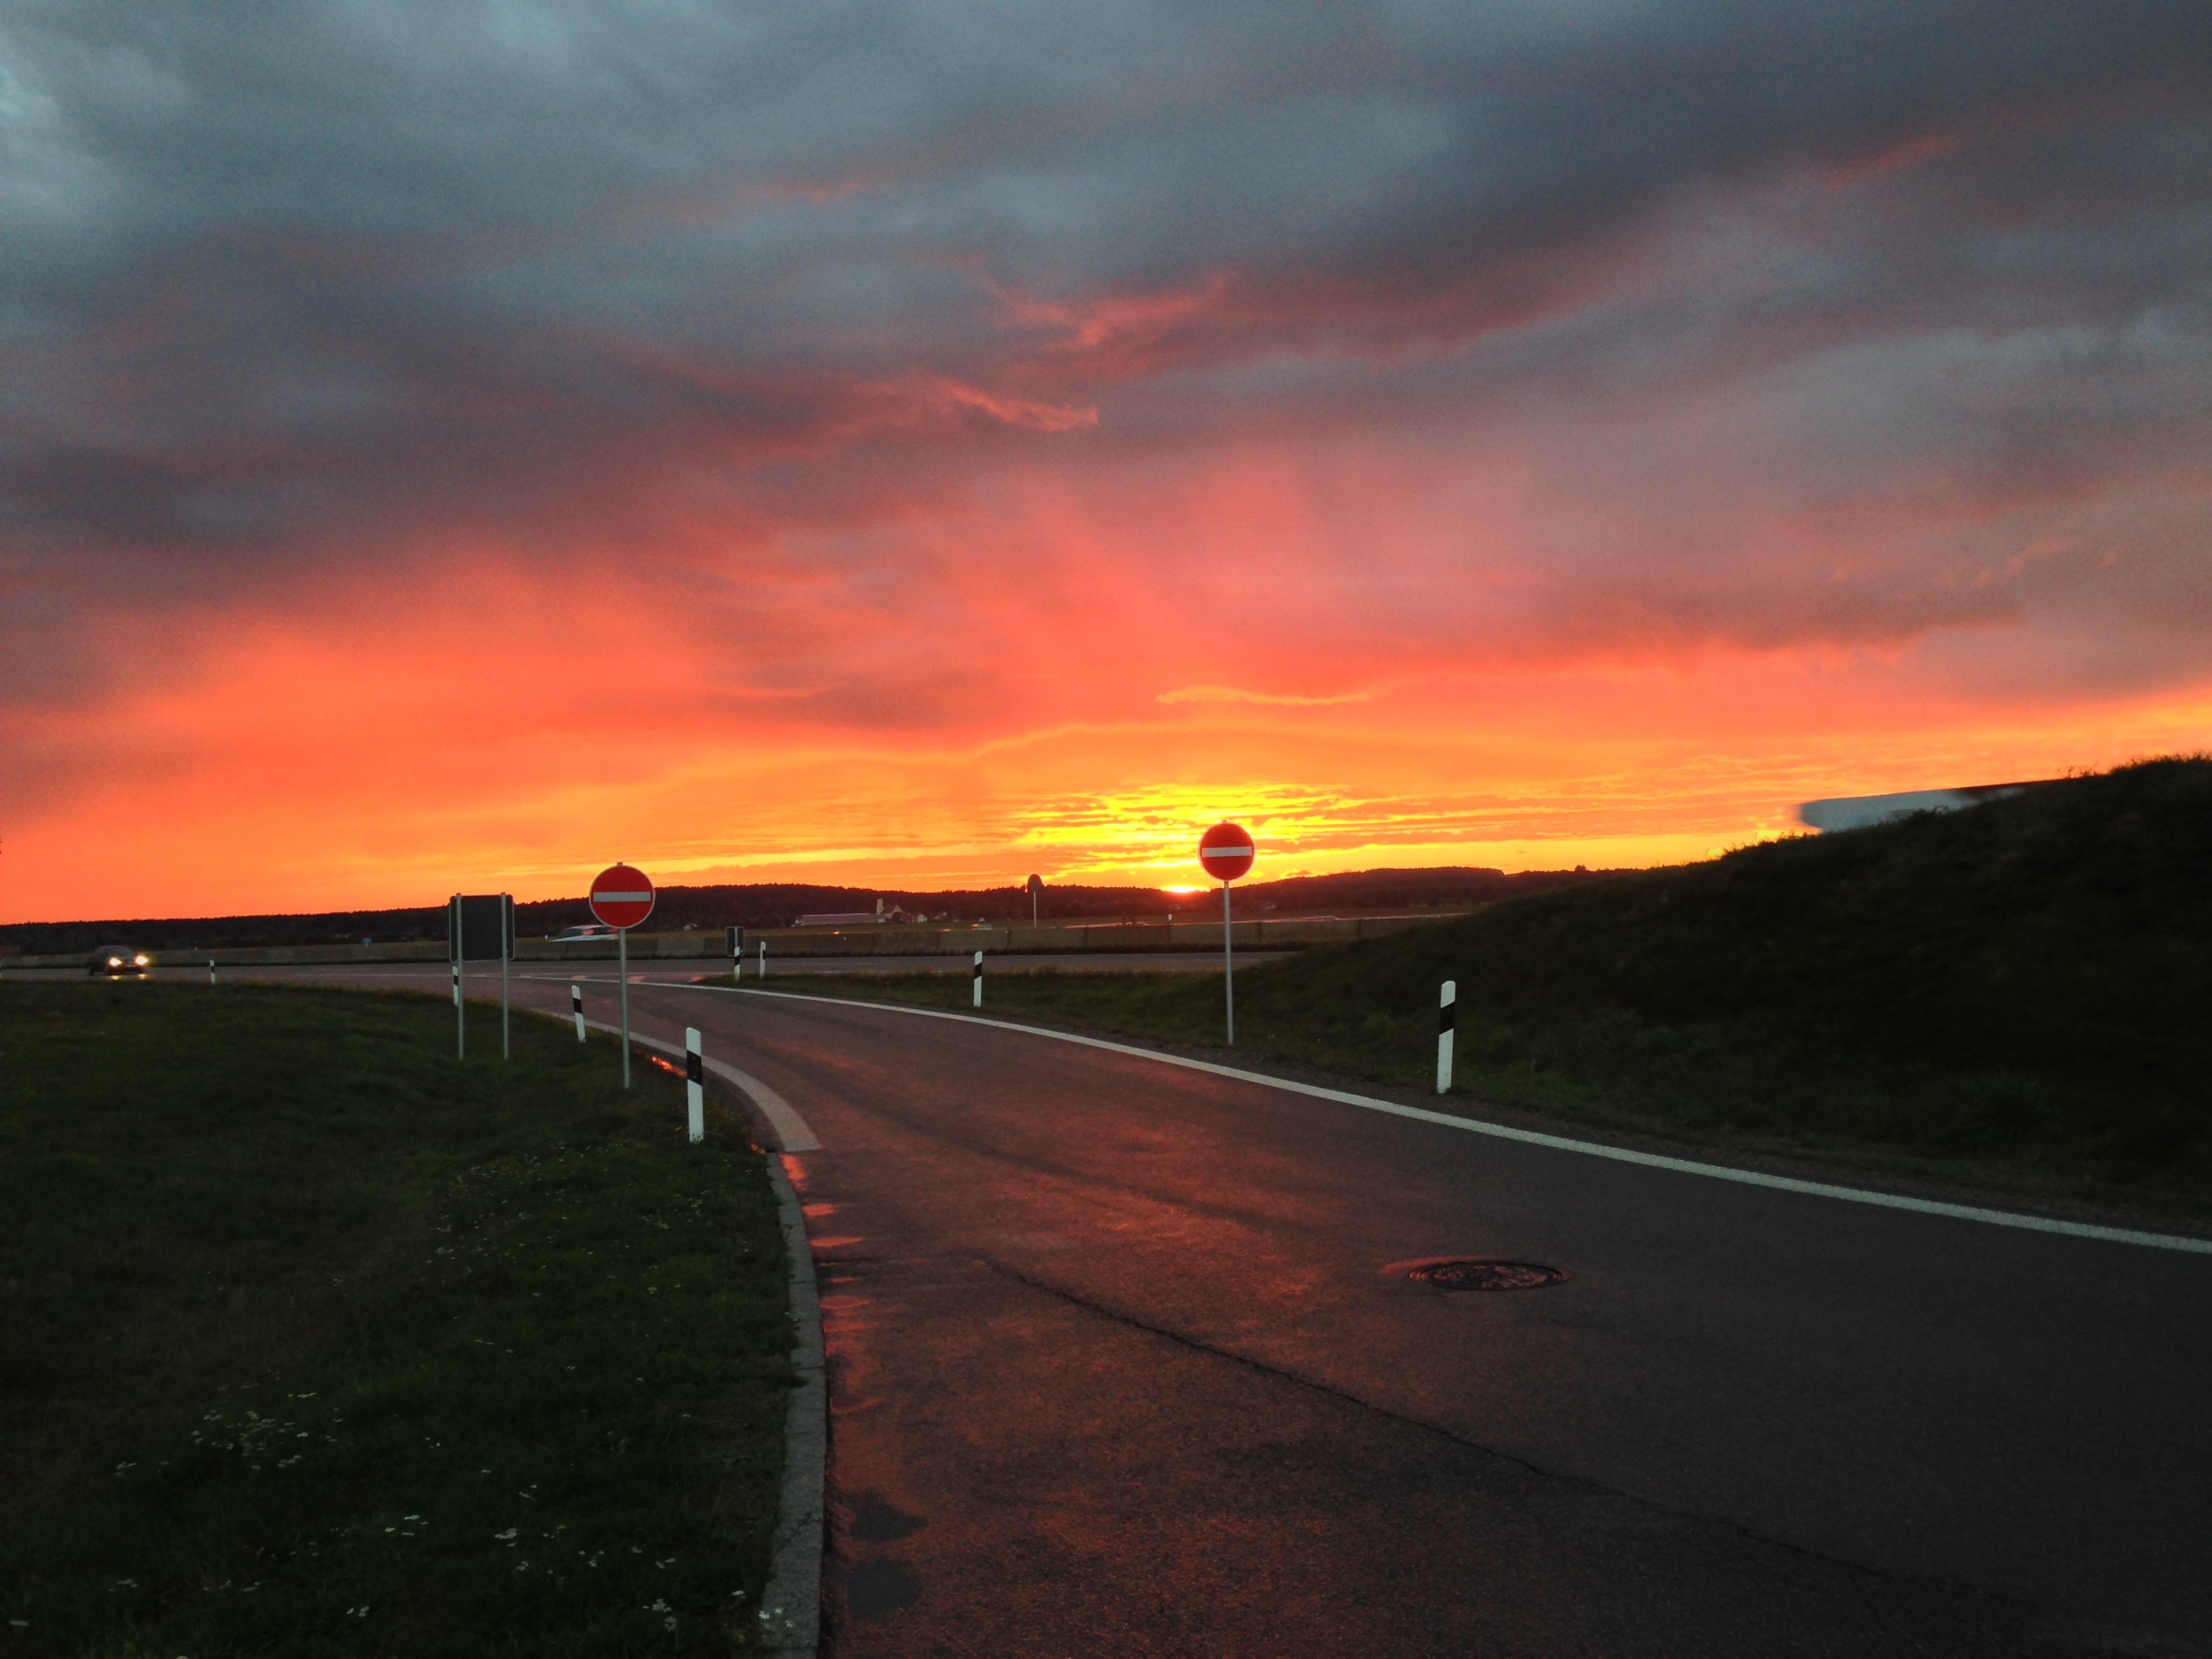 Sunrise on the road free image download